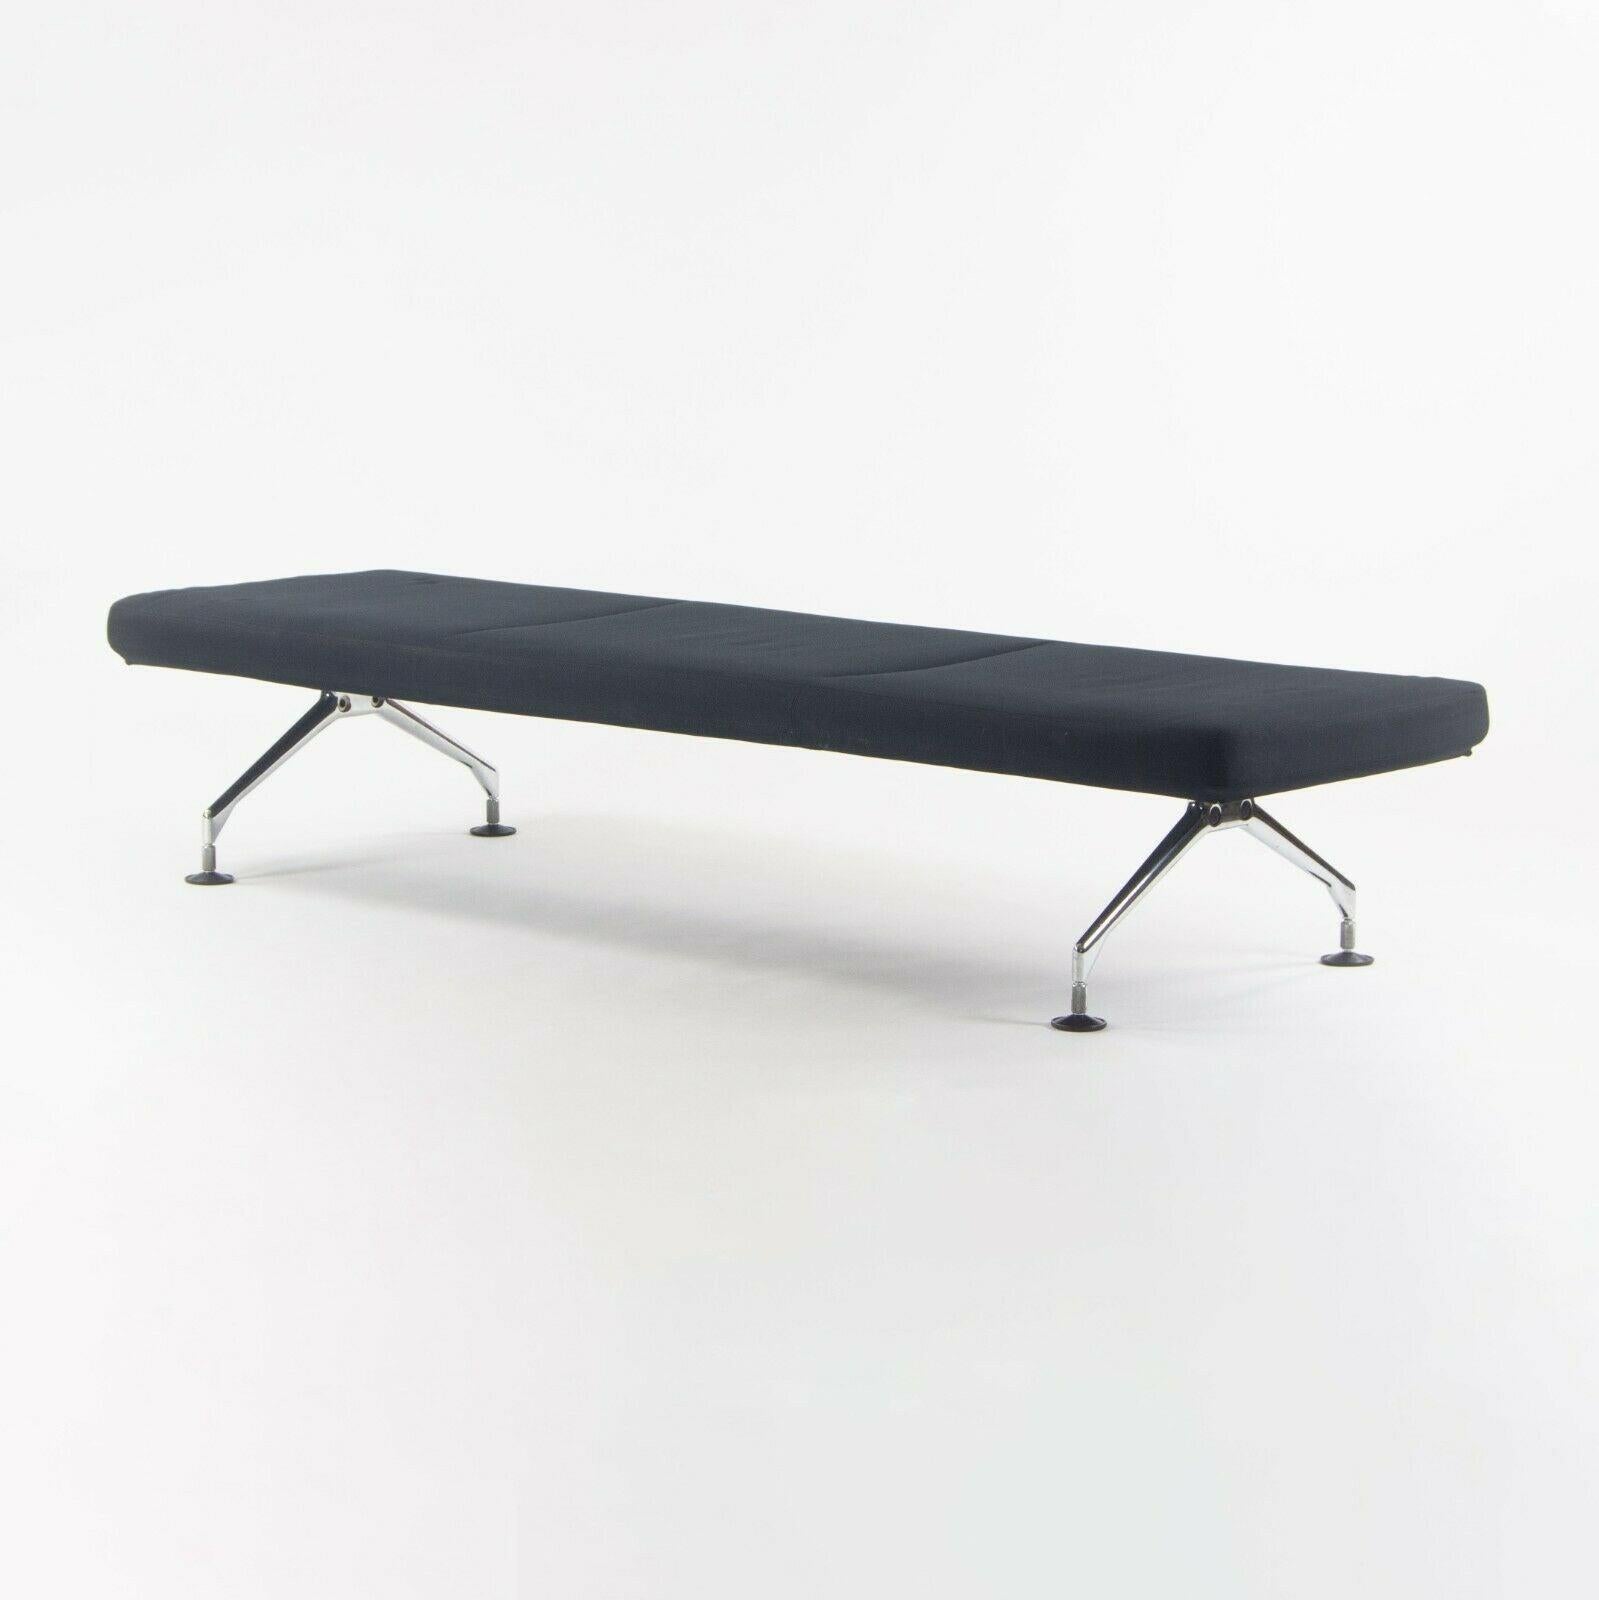 Modern 1989 Antonio Citterio for Vitra Area Montage Daybed Bench Sofa w/ Black Fabric For Sale